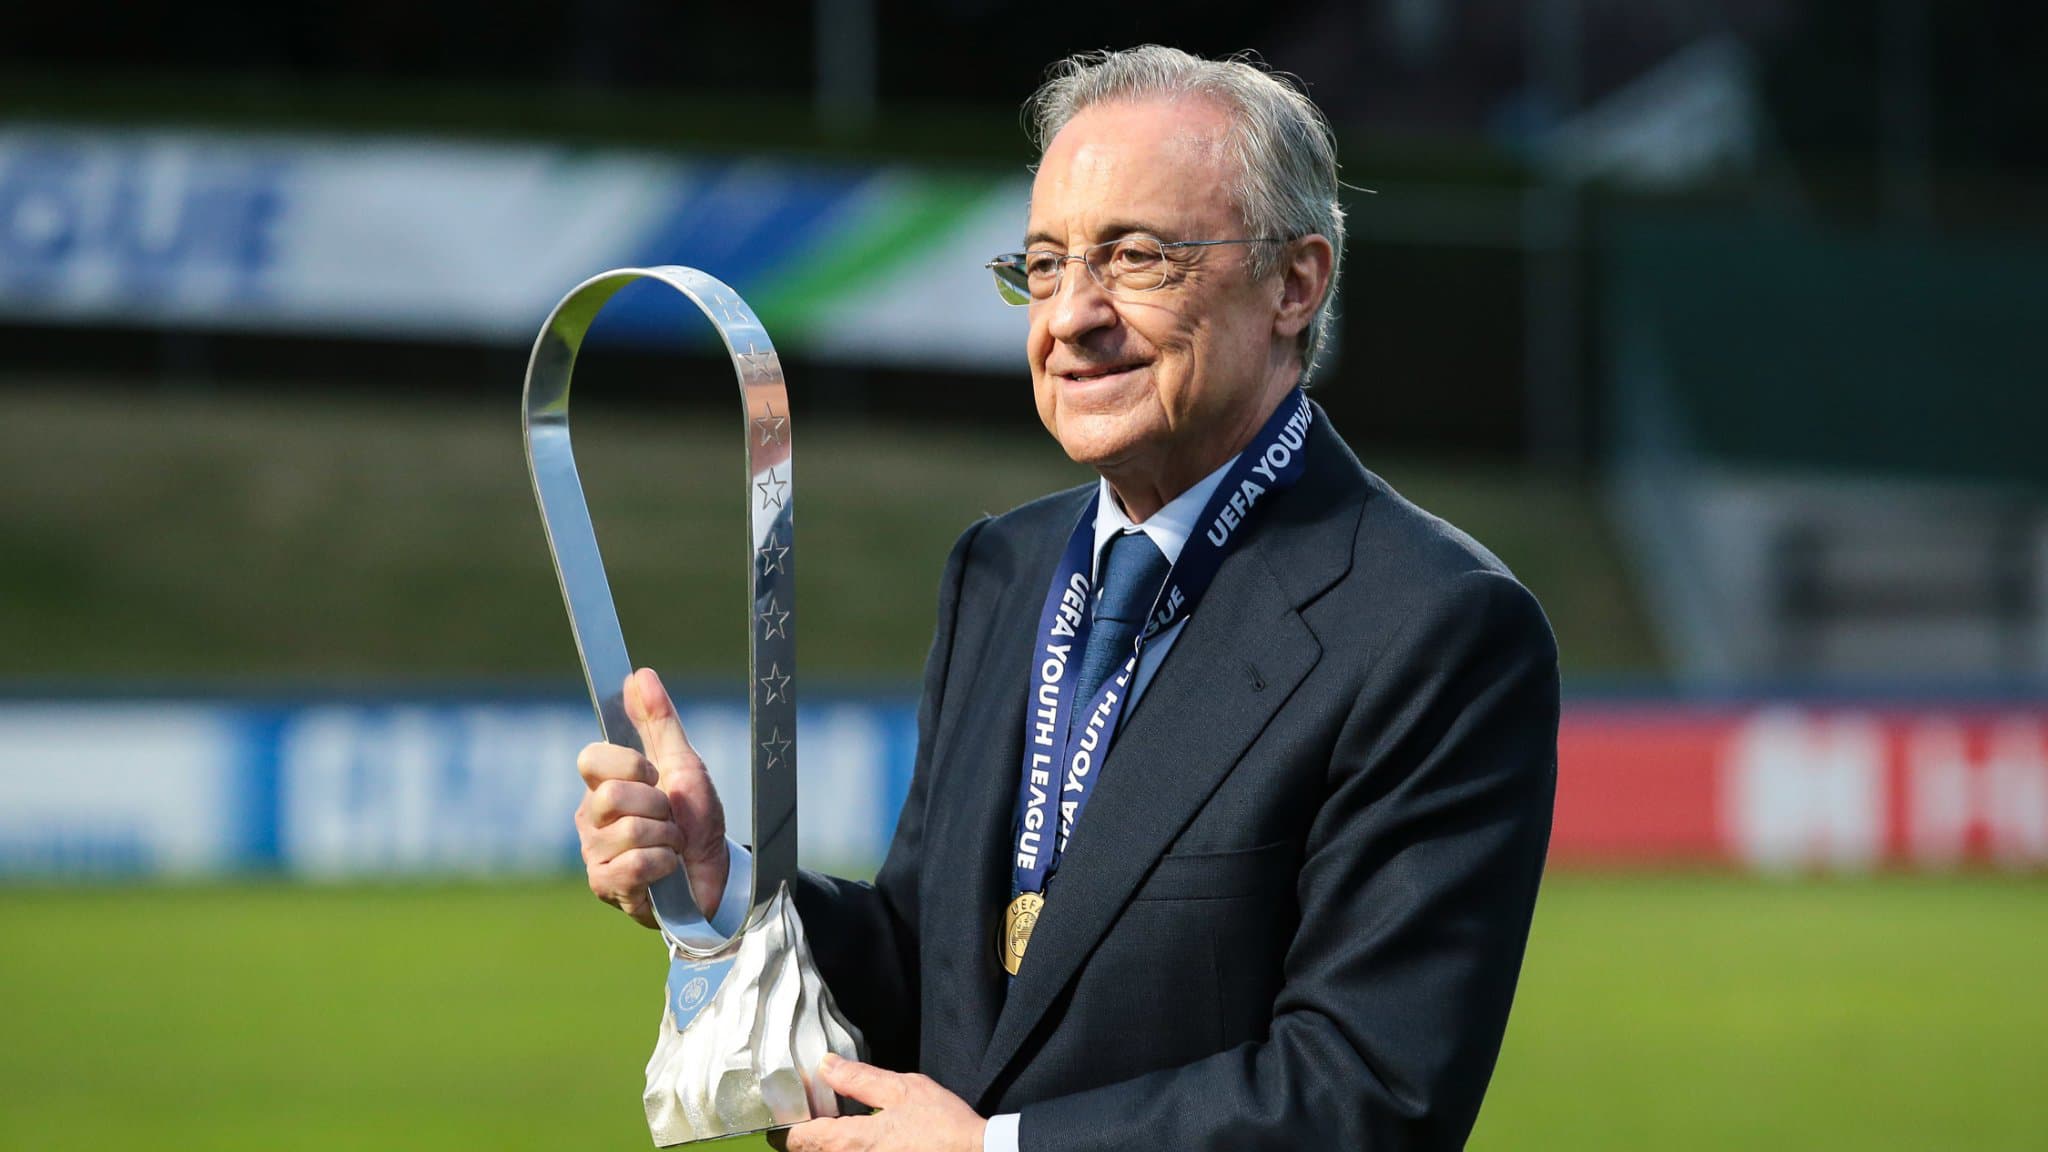 European Super League: first president, Perez sends message to supporters. The Indian Paper